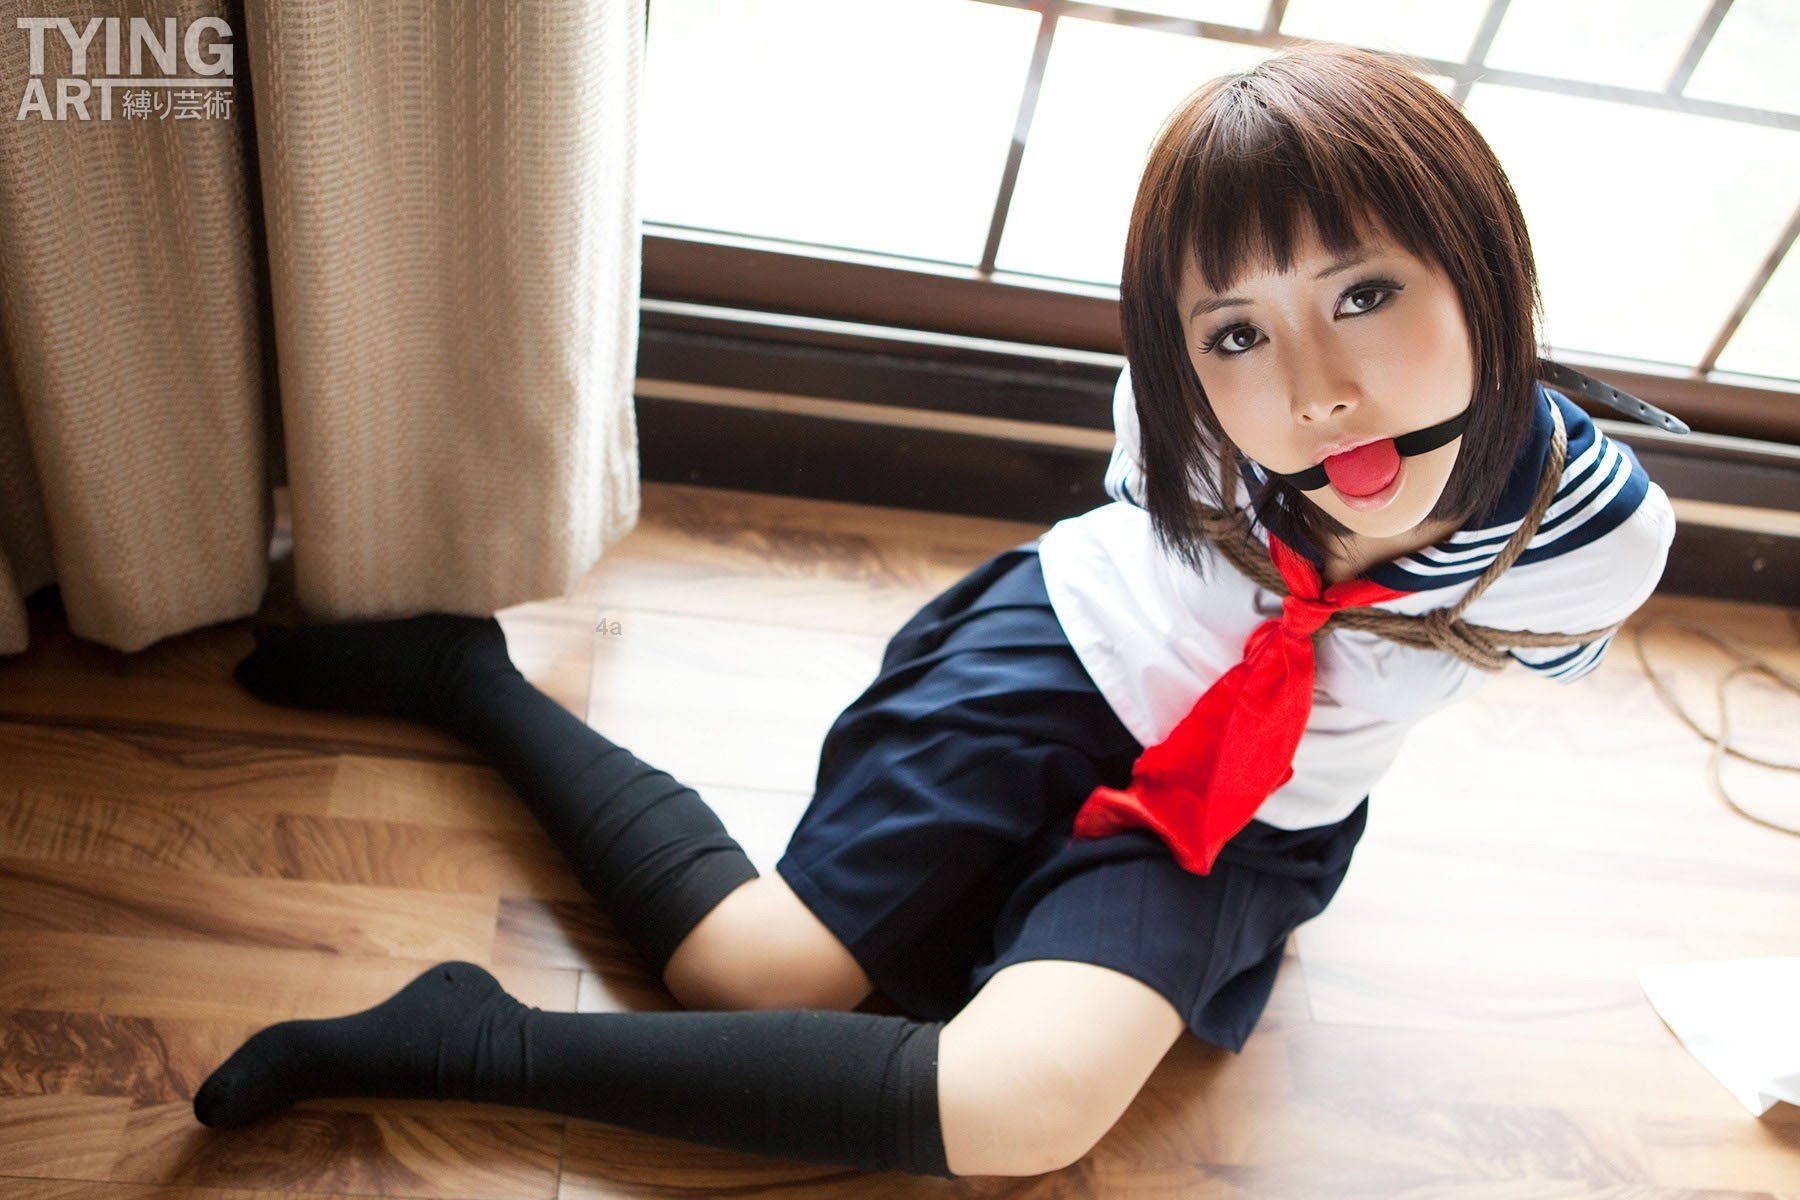 Twix recommendet gagged women Asian